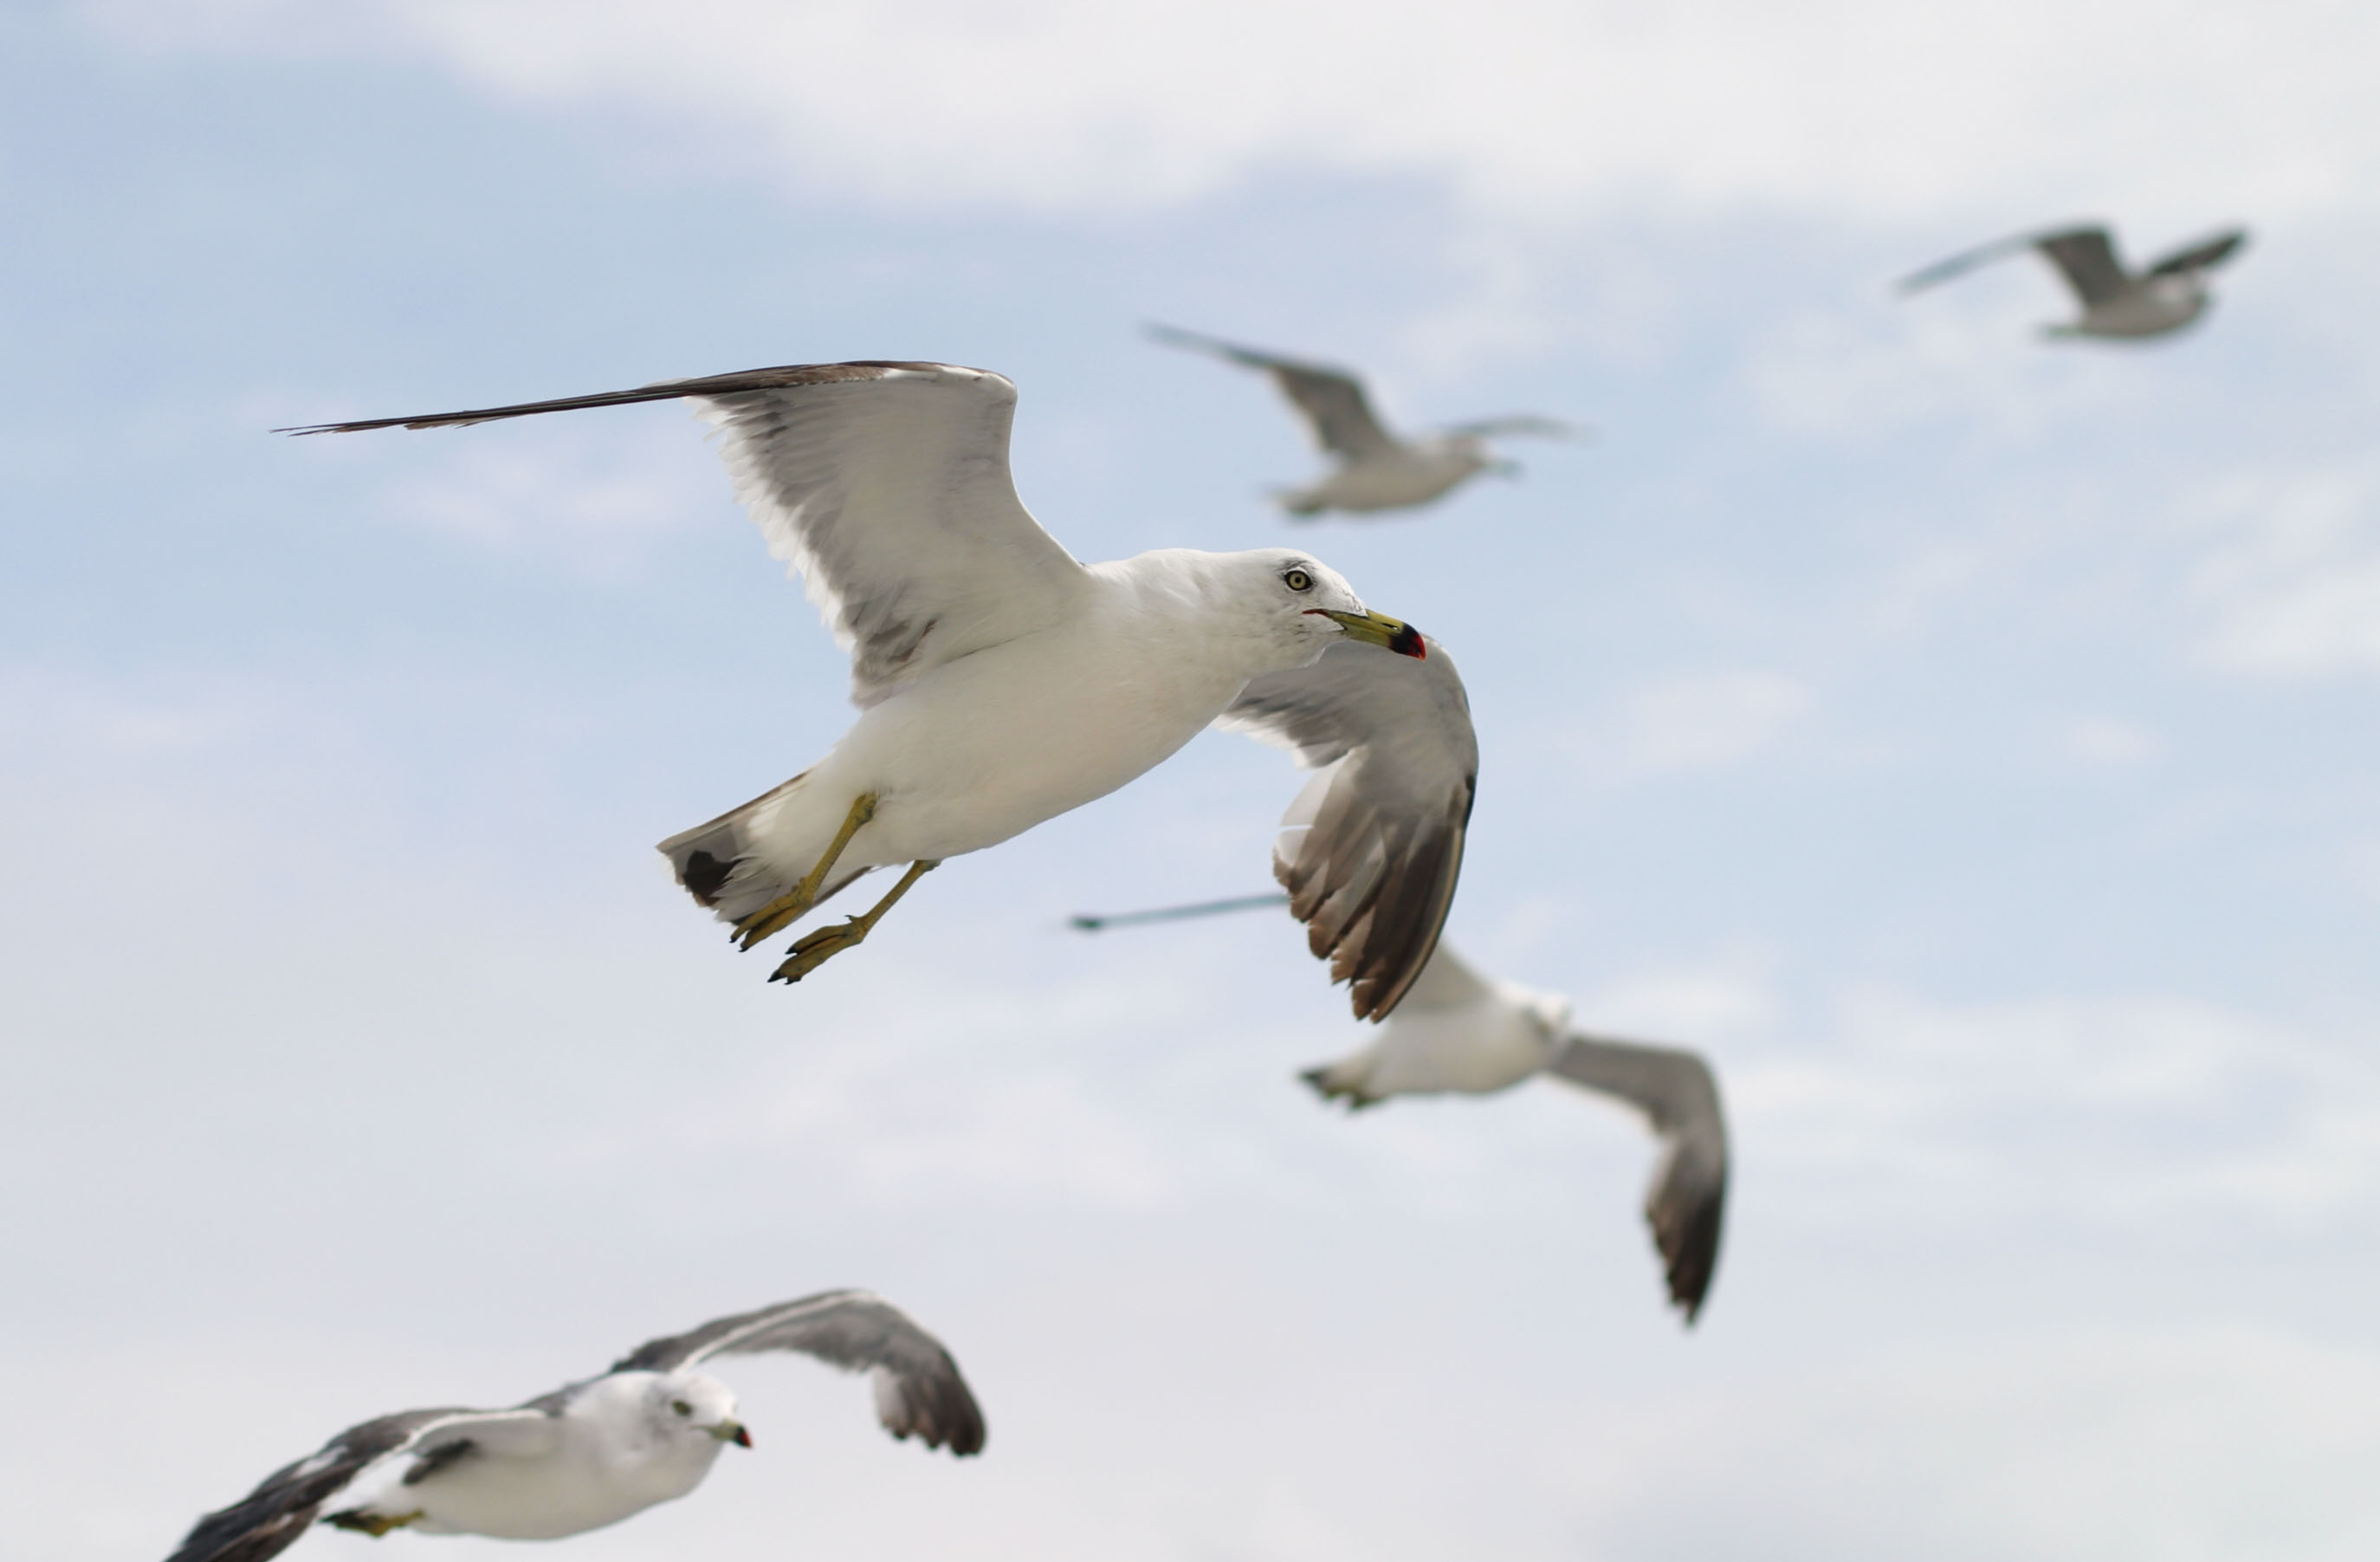 photo,material,free,landscape,picture,stock photo,Creative Commons,Flock of seagulls, seagull, sky, sea, 